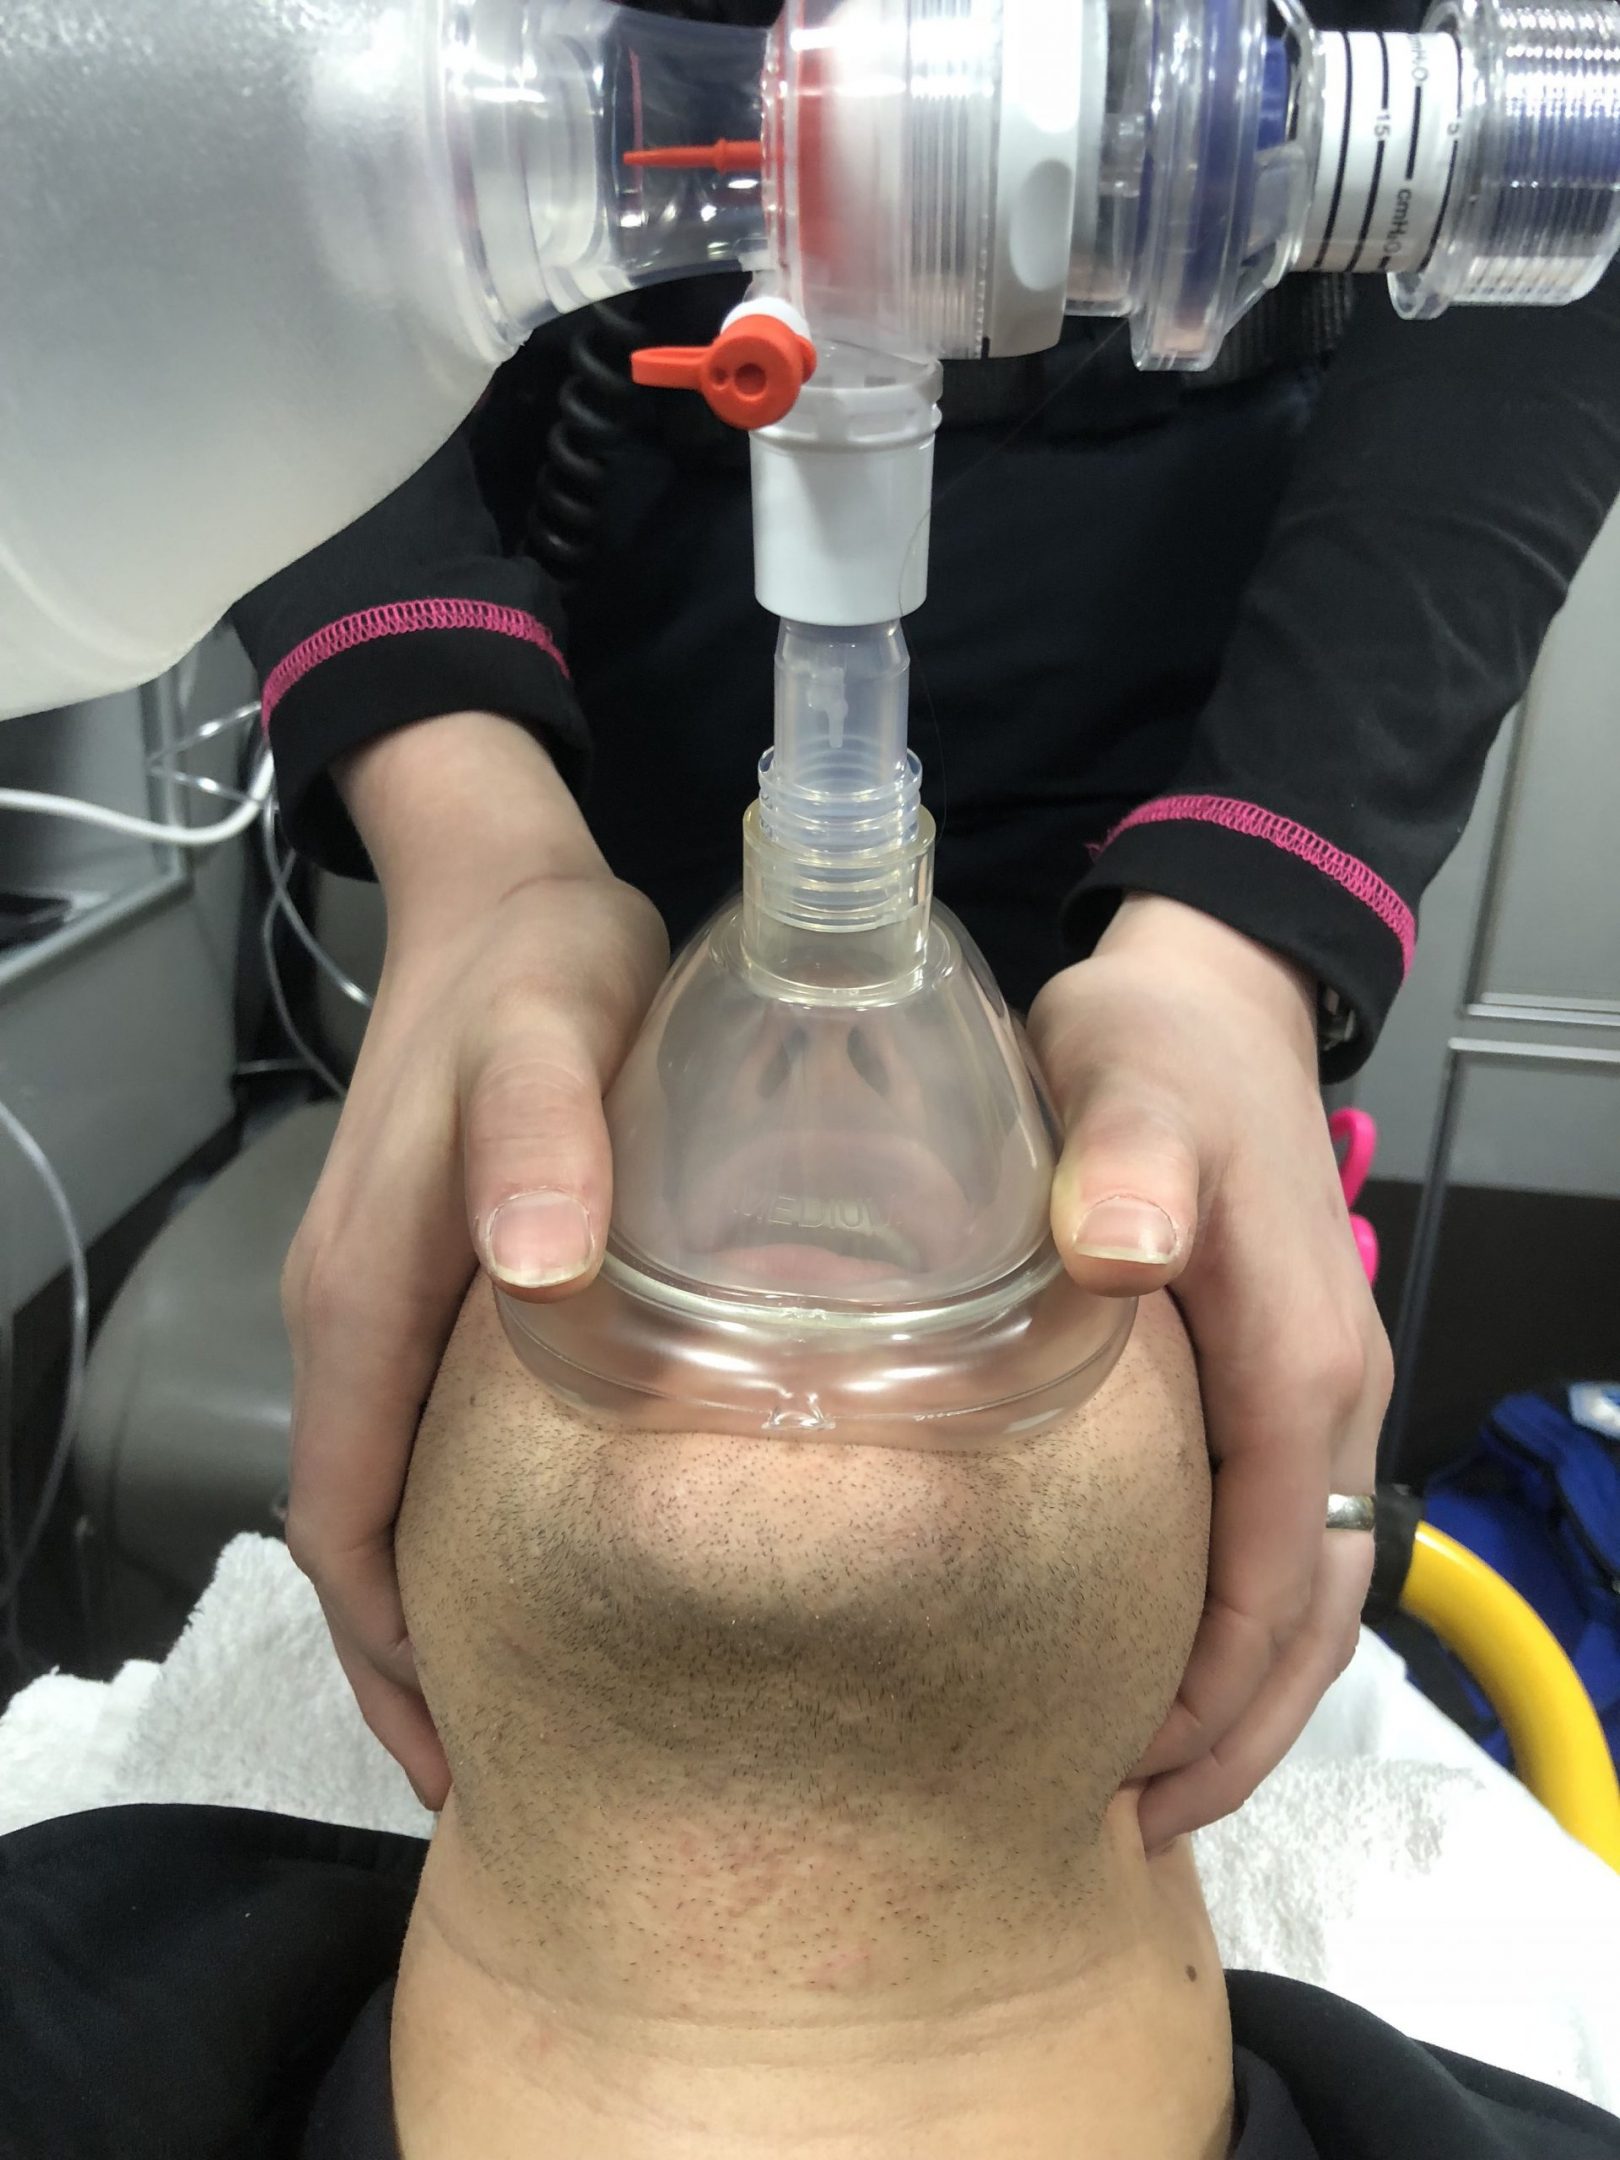 The ideal way to ensure a proper mask seal using a two-person approach is for one provider to place the pads of the hand and the thumbs on the mask, while the second provider uses their index and other fingers to pull the jaw forward maximally.